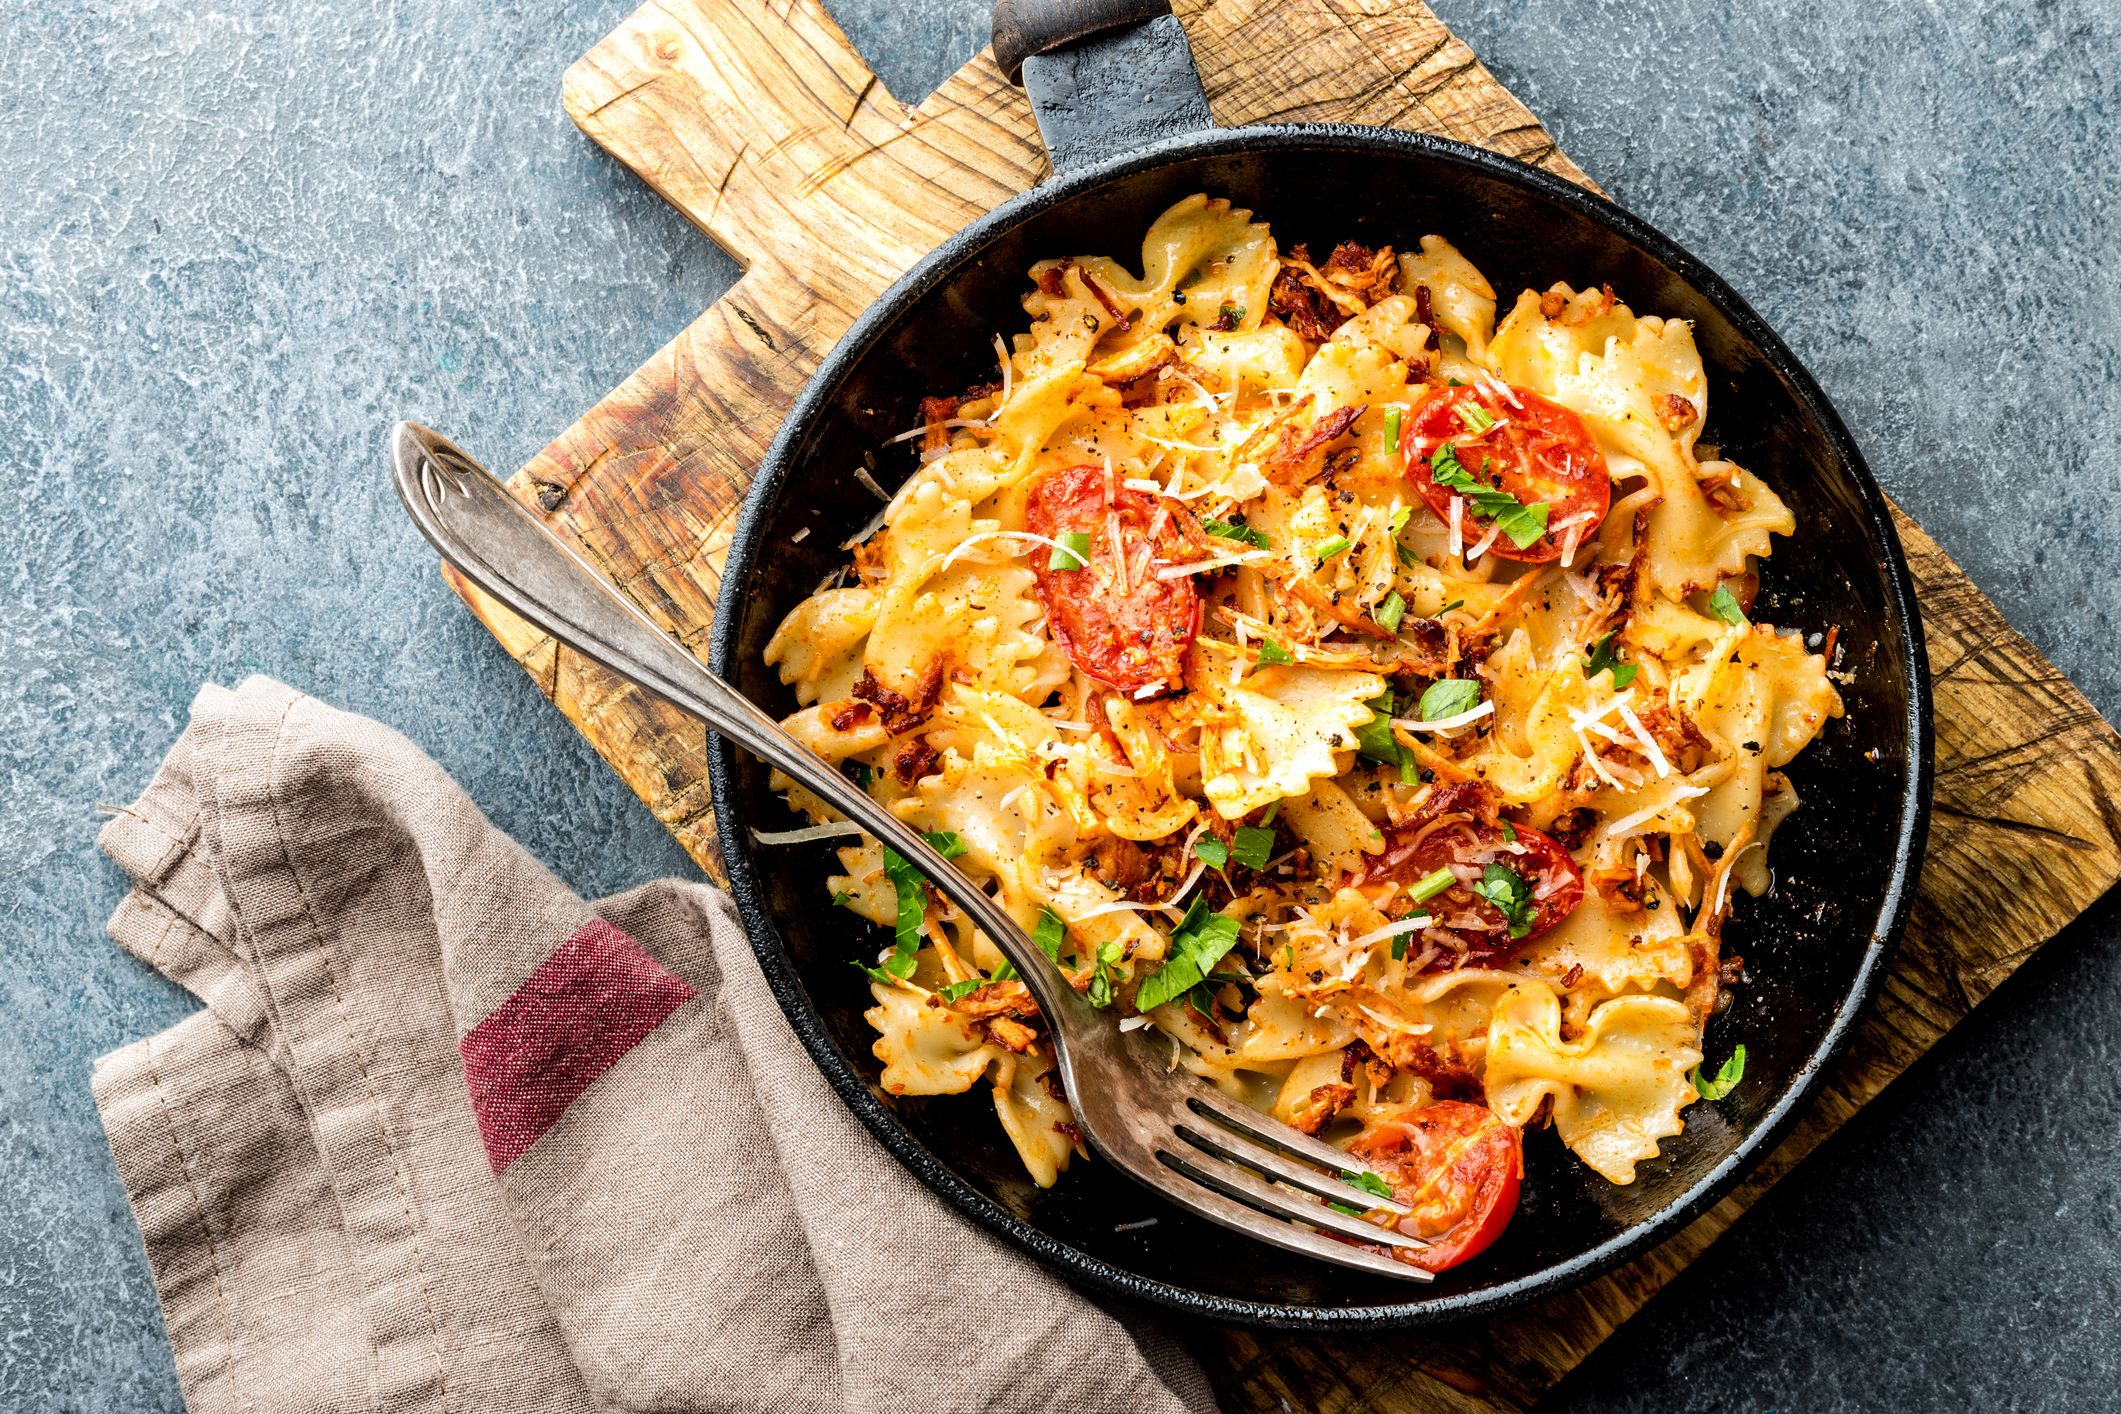 The 9 Best Gluten-Free Pastas And Noodles Of 2020, Per Reviews